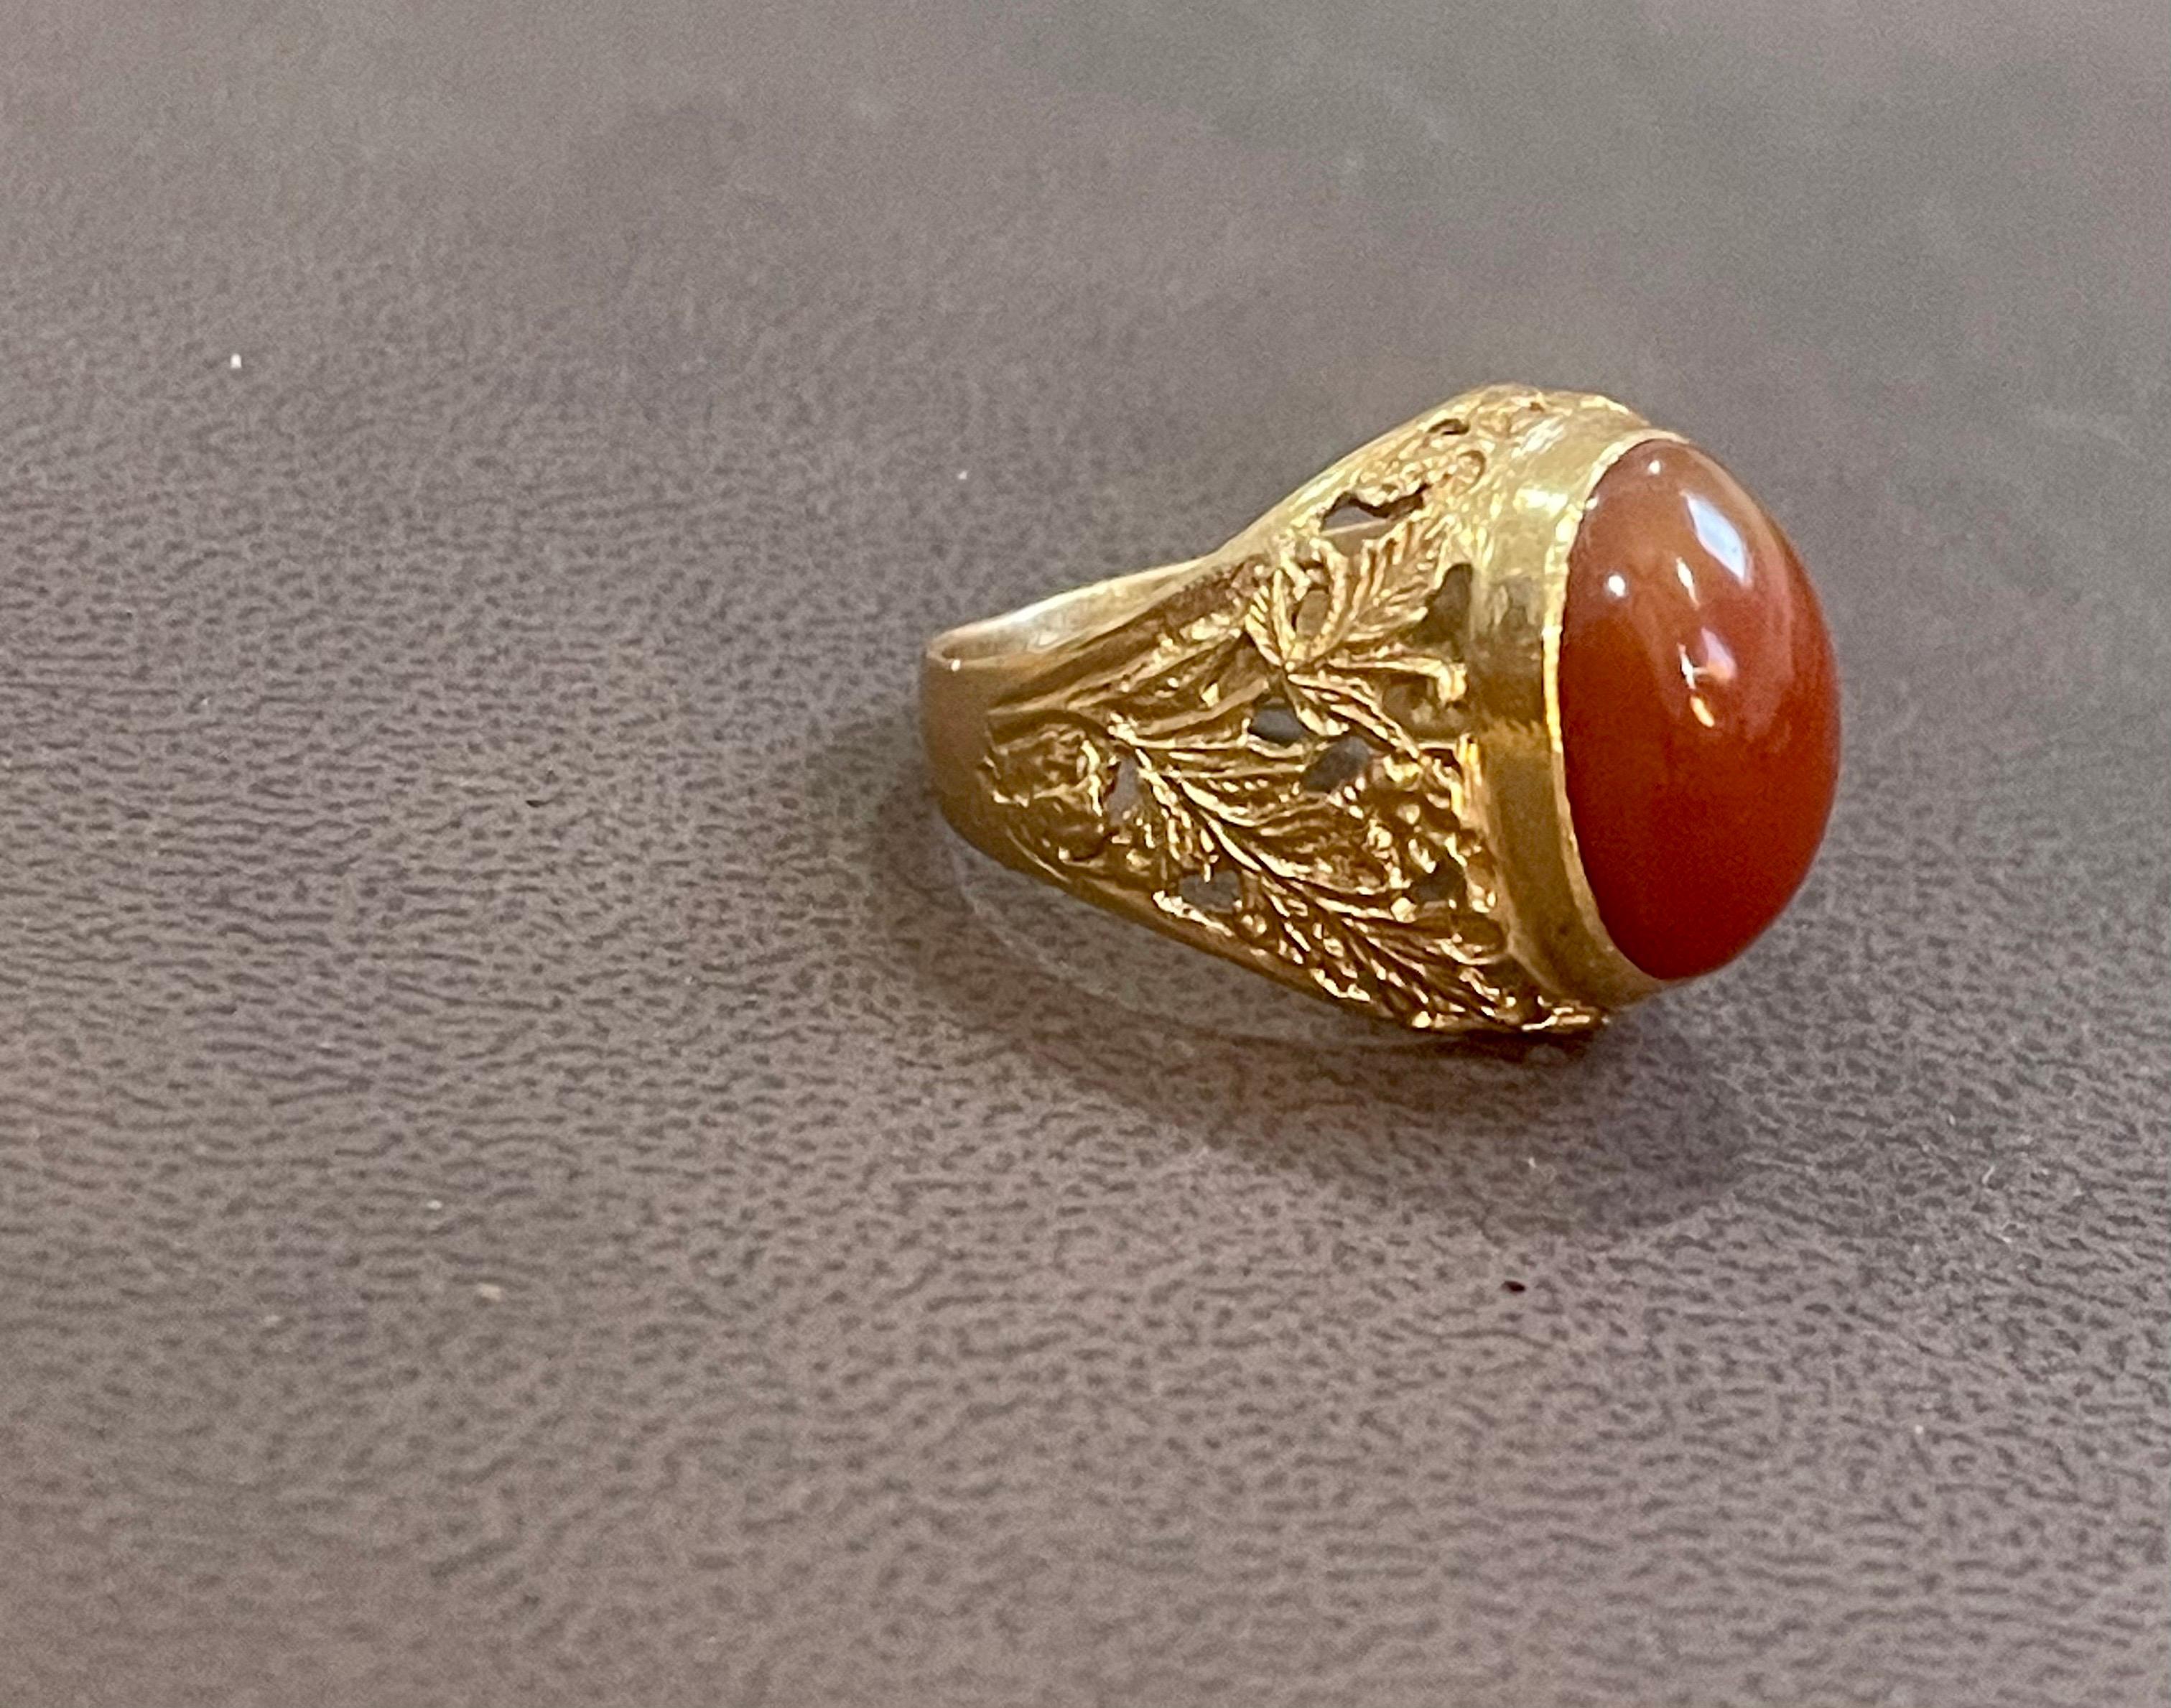 7 Carat Jasper Cabochon 18 Karat Yellow Gold Classic Wide Ring In Excellent Condition For Sale In New York, NY